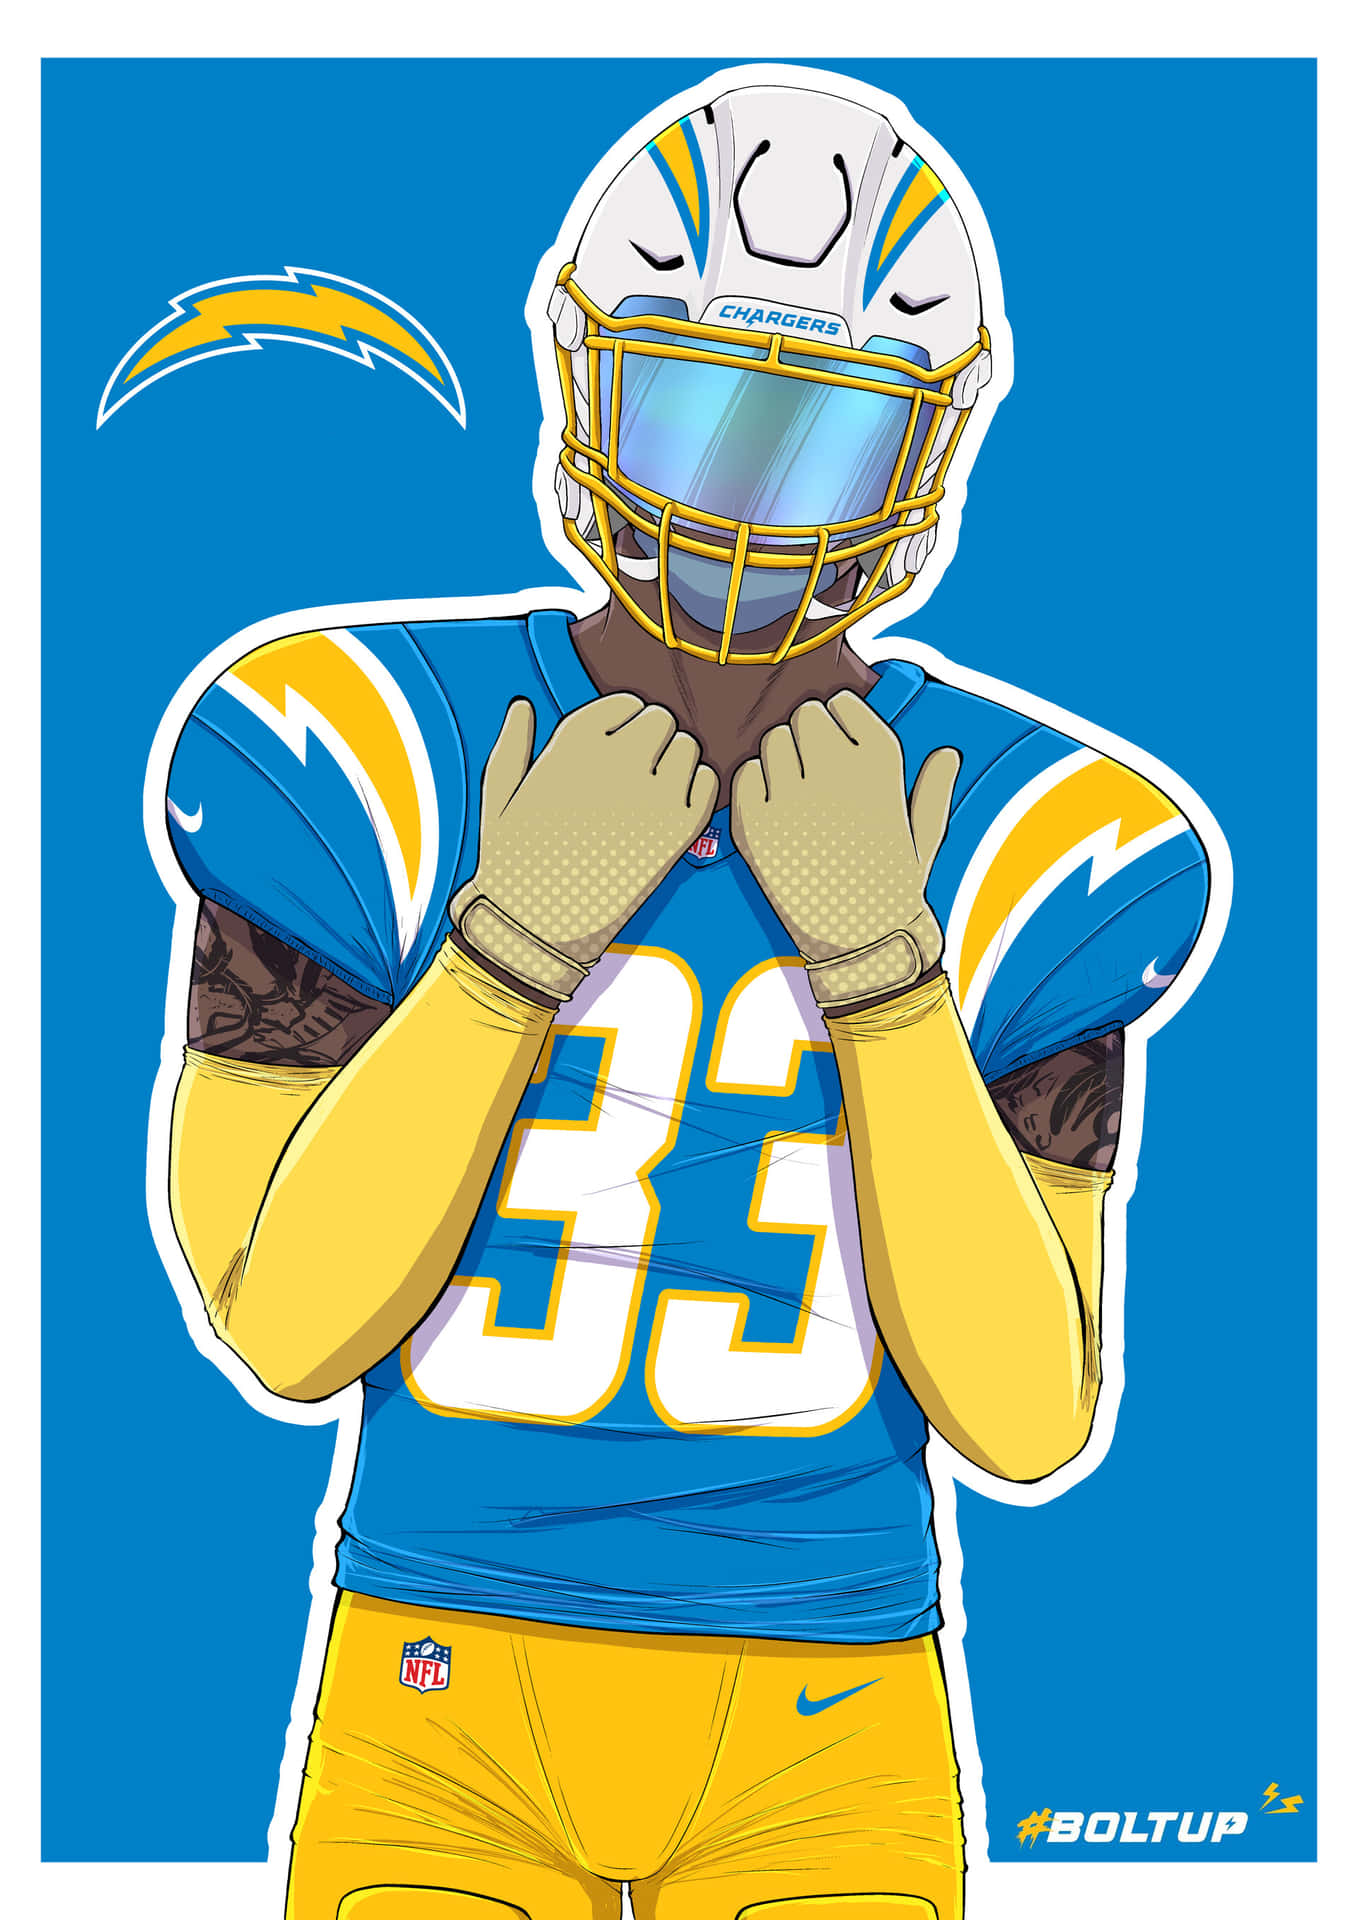 Chargers Wallpapers  Los Angeles Chargers  chargerscom  Football  artwork Nfl football wallpaper Nfl football art